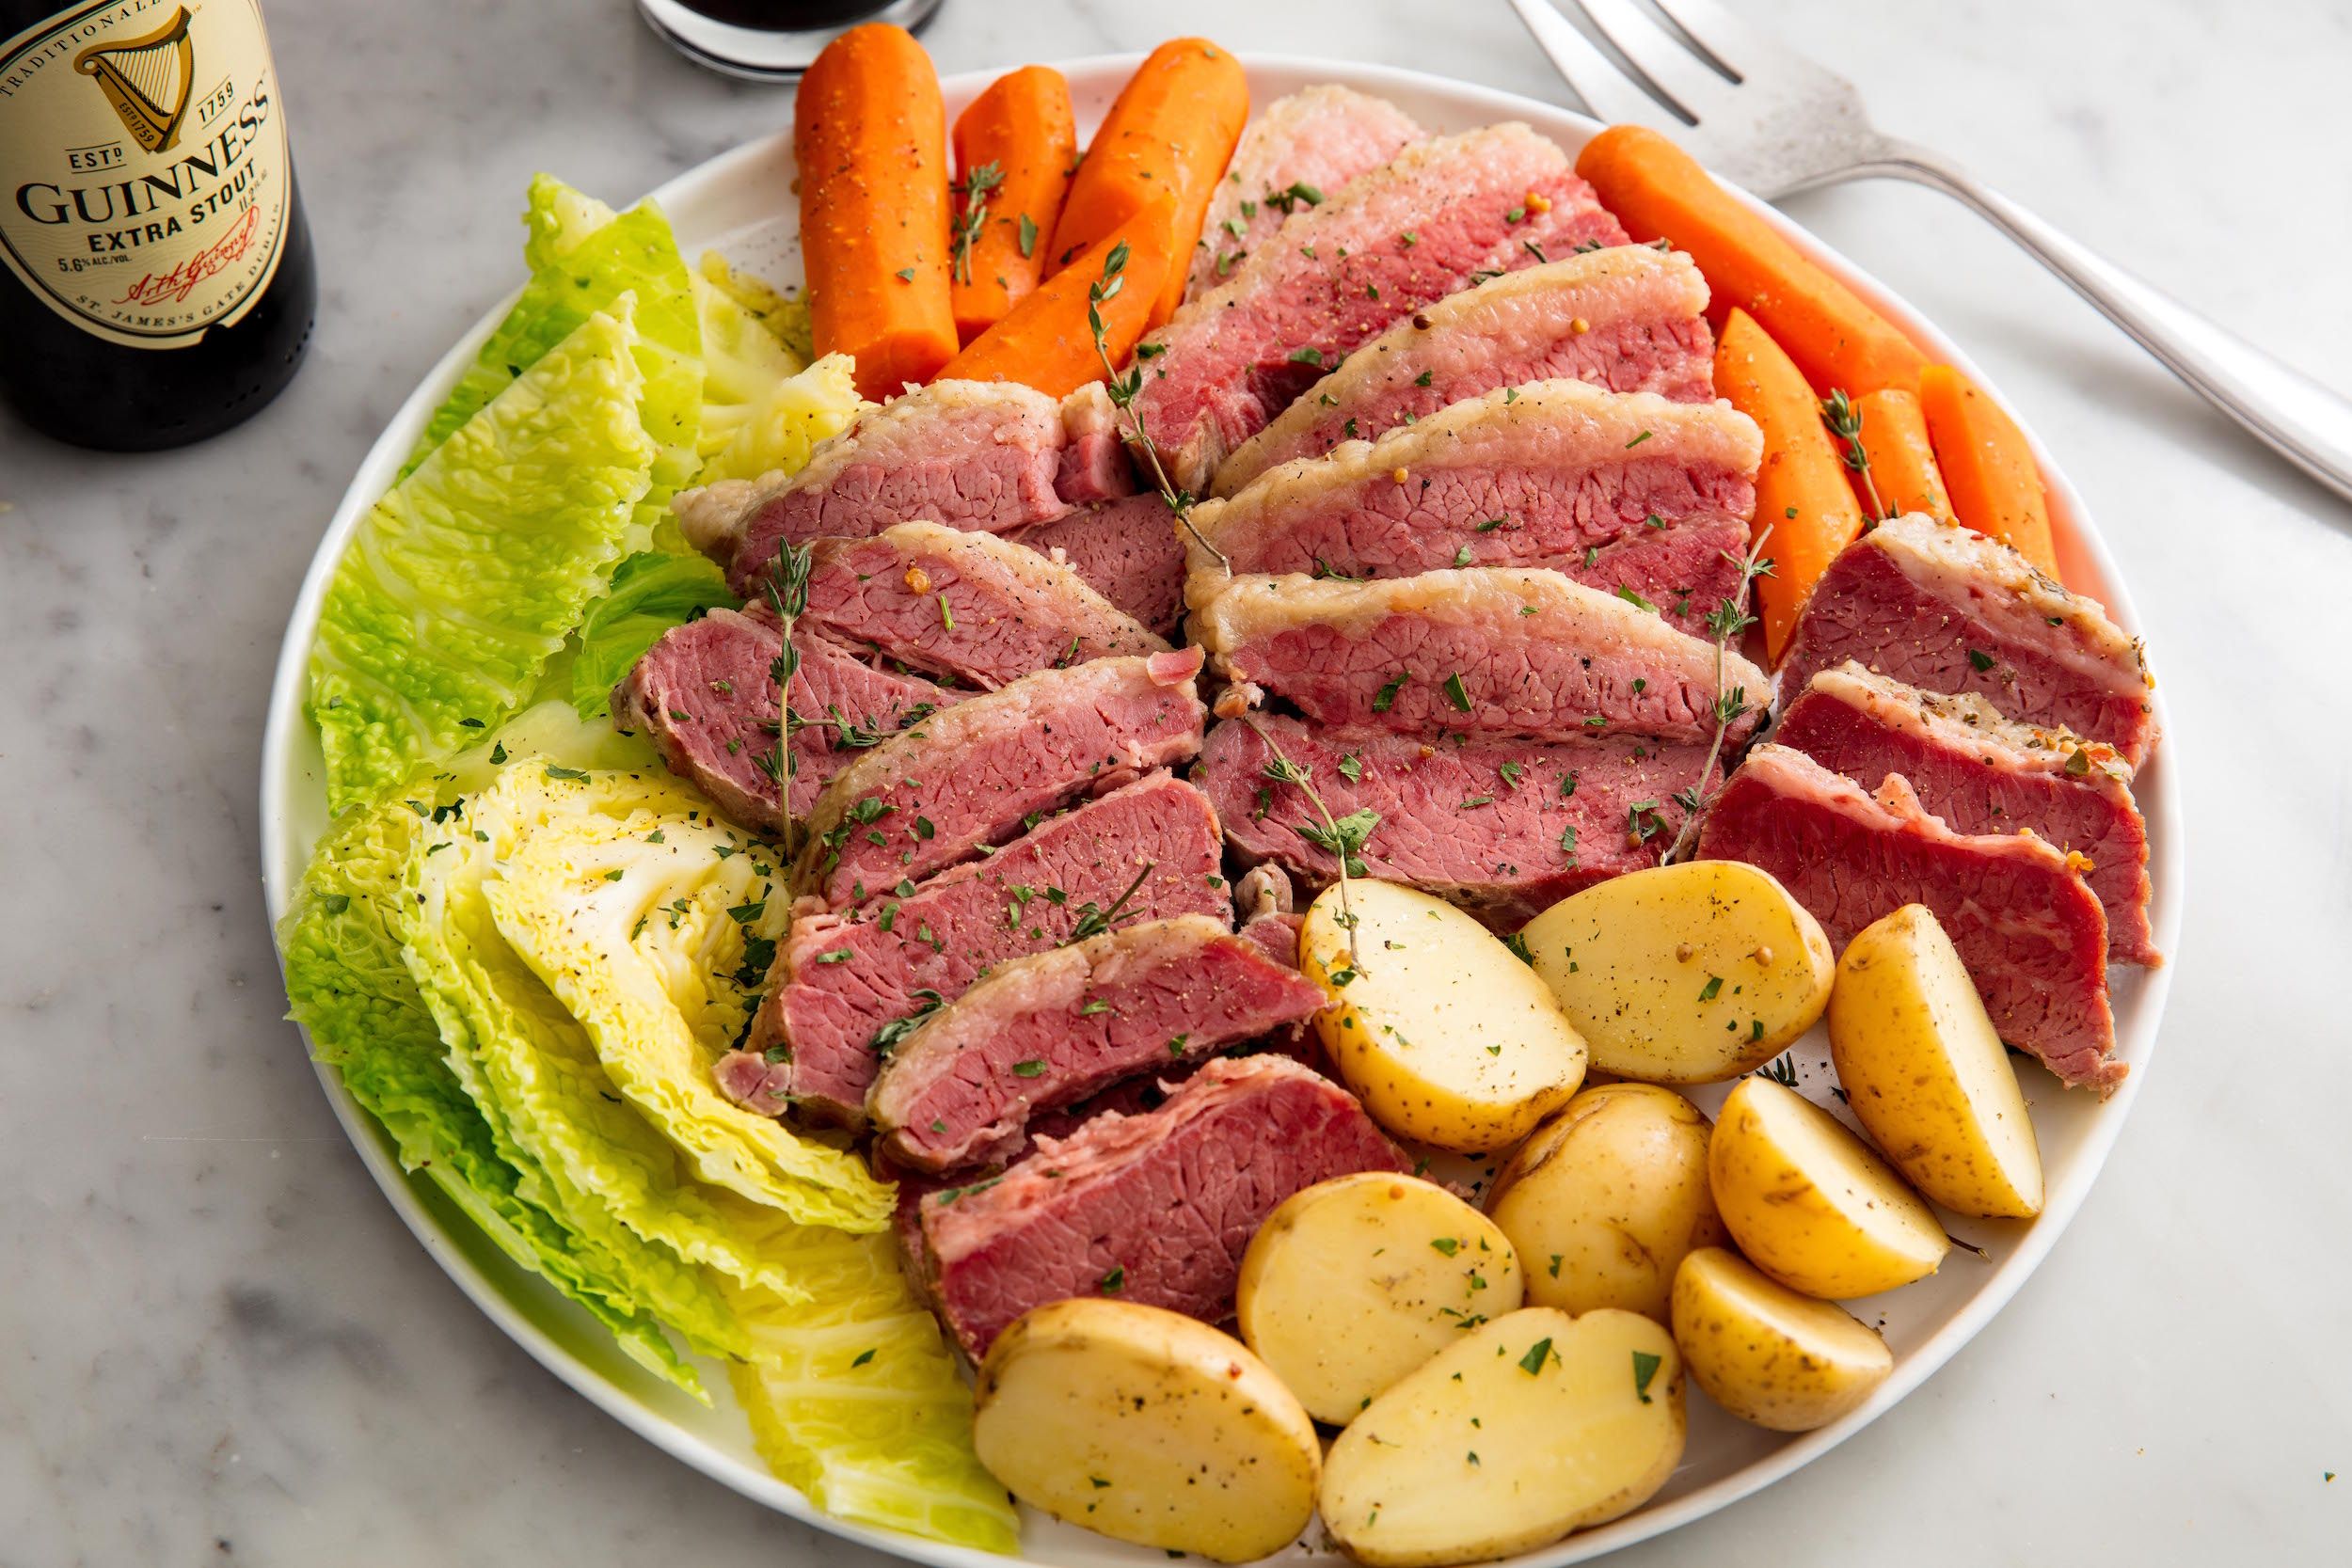 Slow Cooker Corned Beef And Cabbage Recipe How To Make Crock Pot Corned Beef And Cabbage